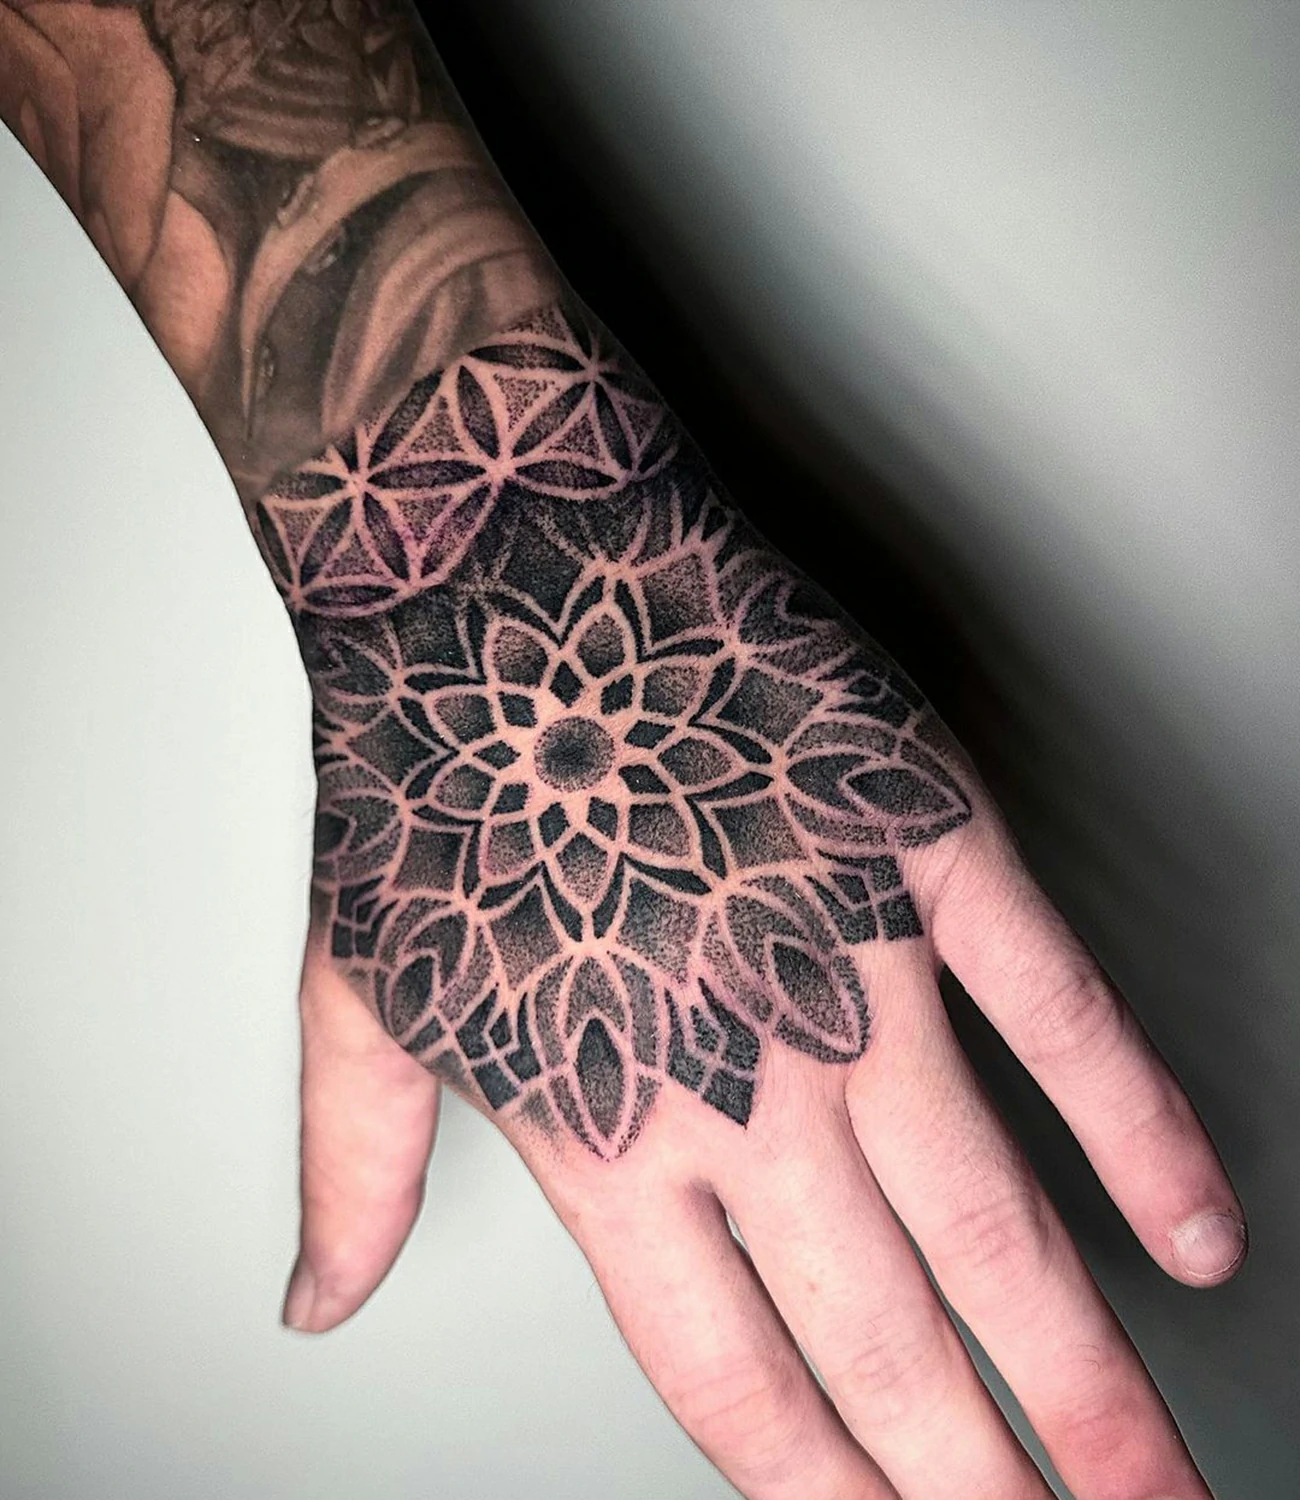 Geometric Hand Tattoo: Geometric hand tattoos feature symmetrical shapes and patterns that complement the natural lines of the hand, making a bold statement.